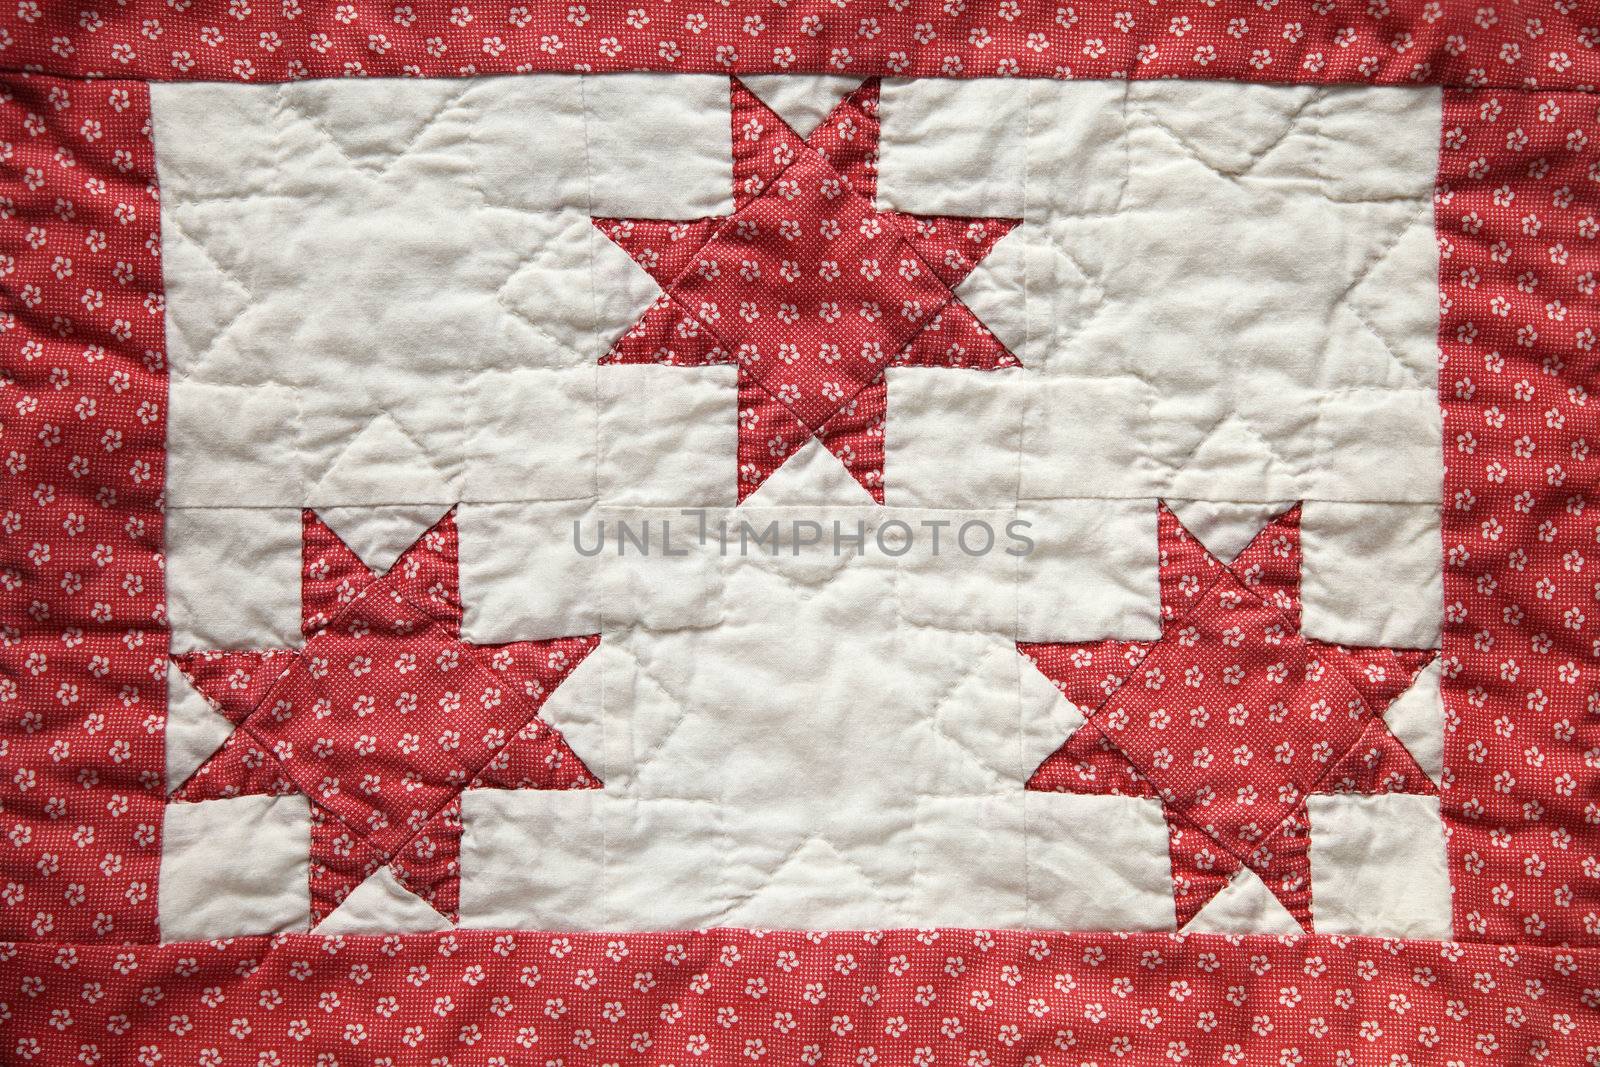 three eight-point quilted stars with a border